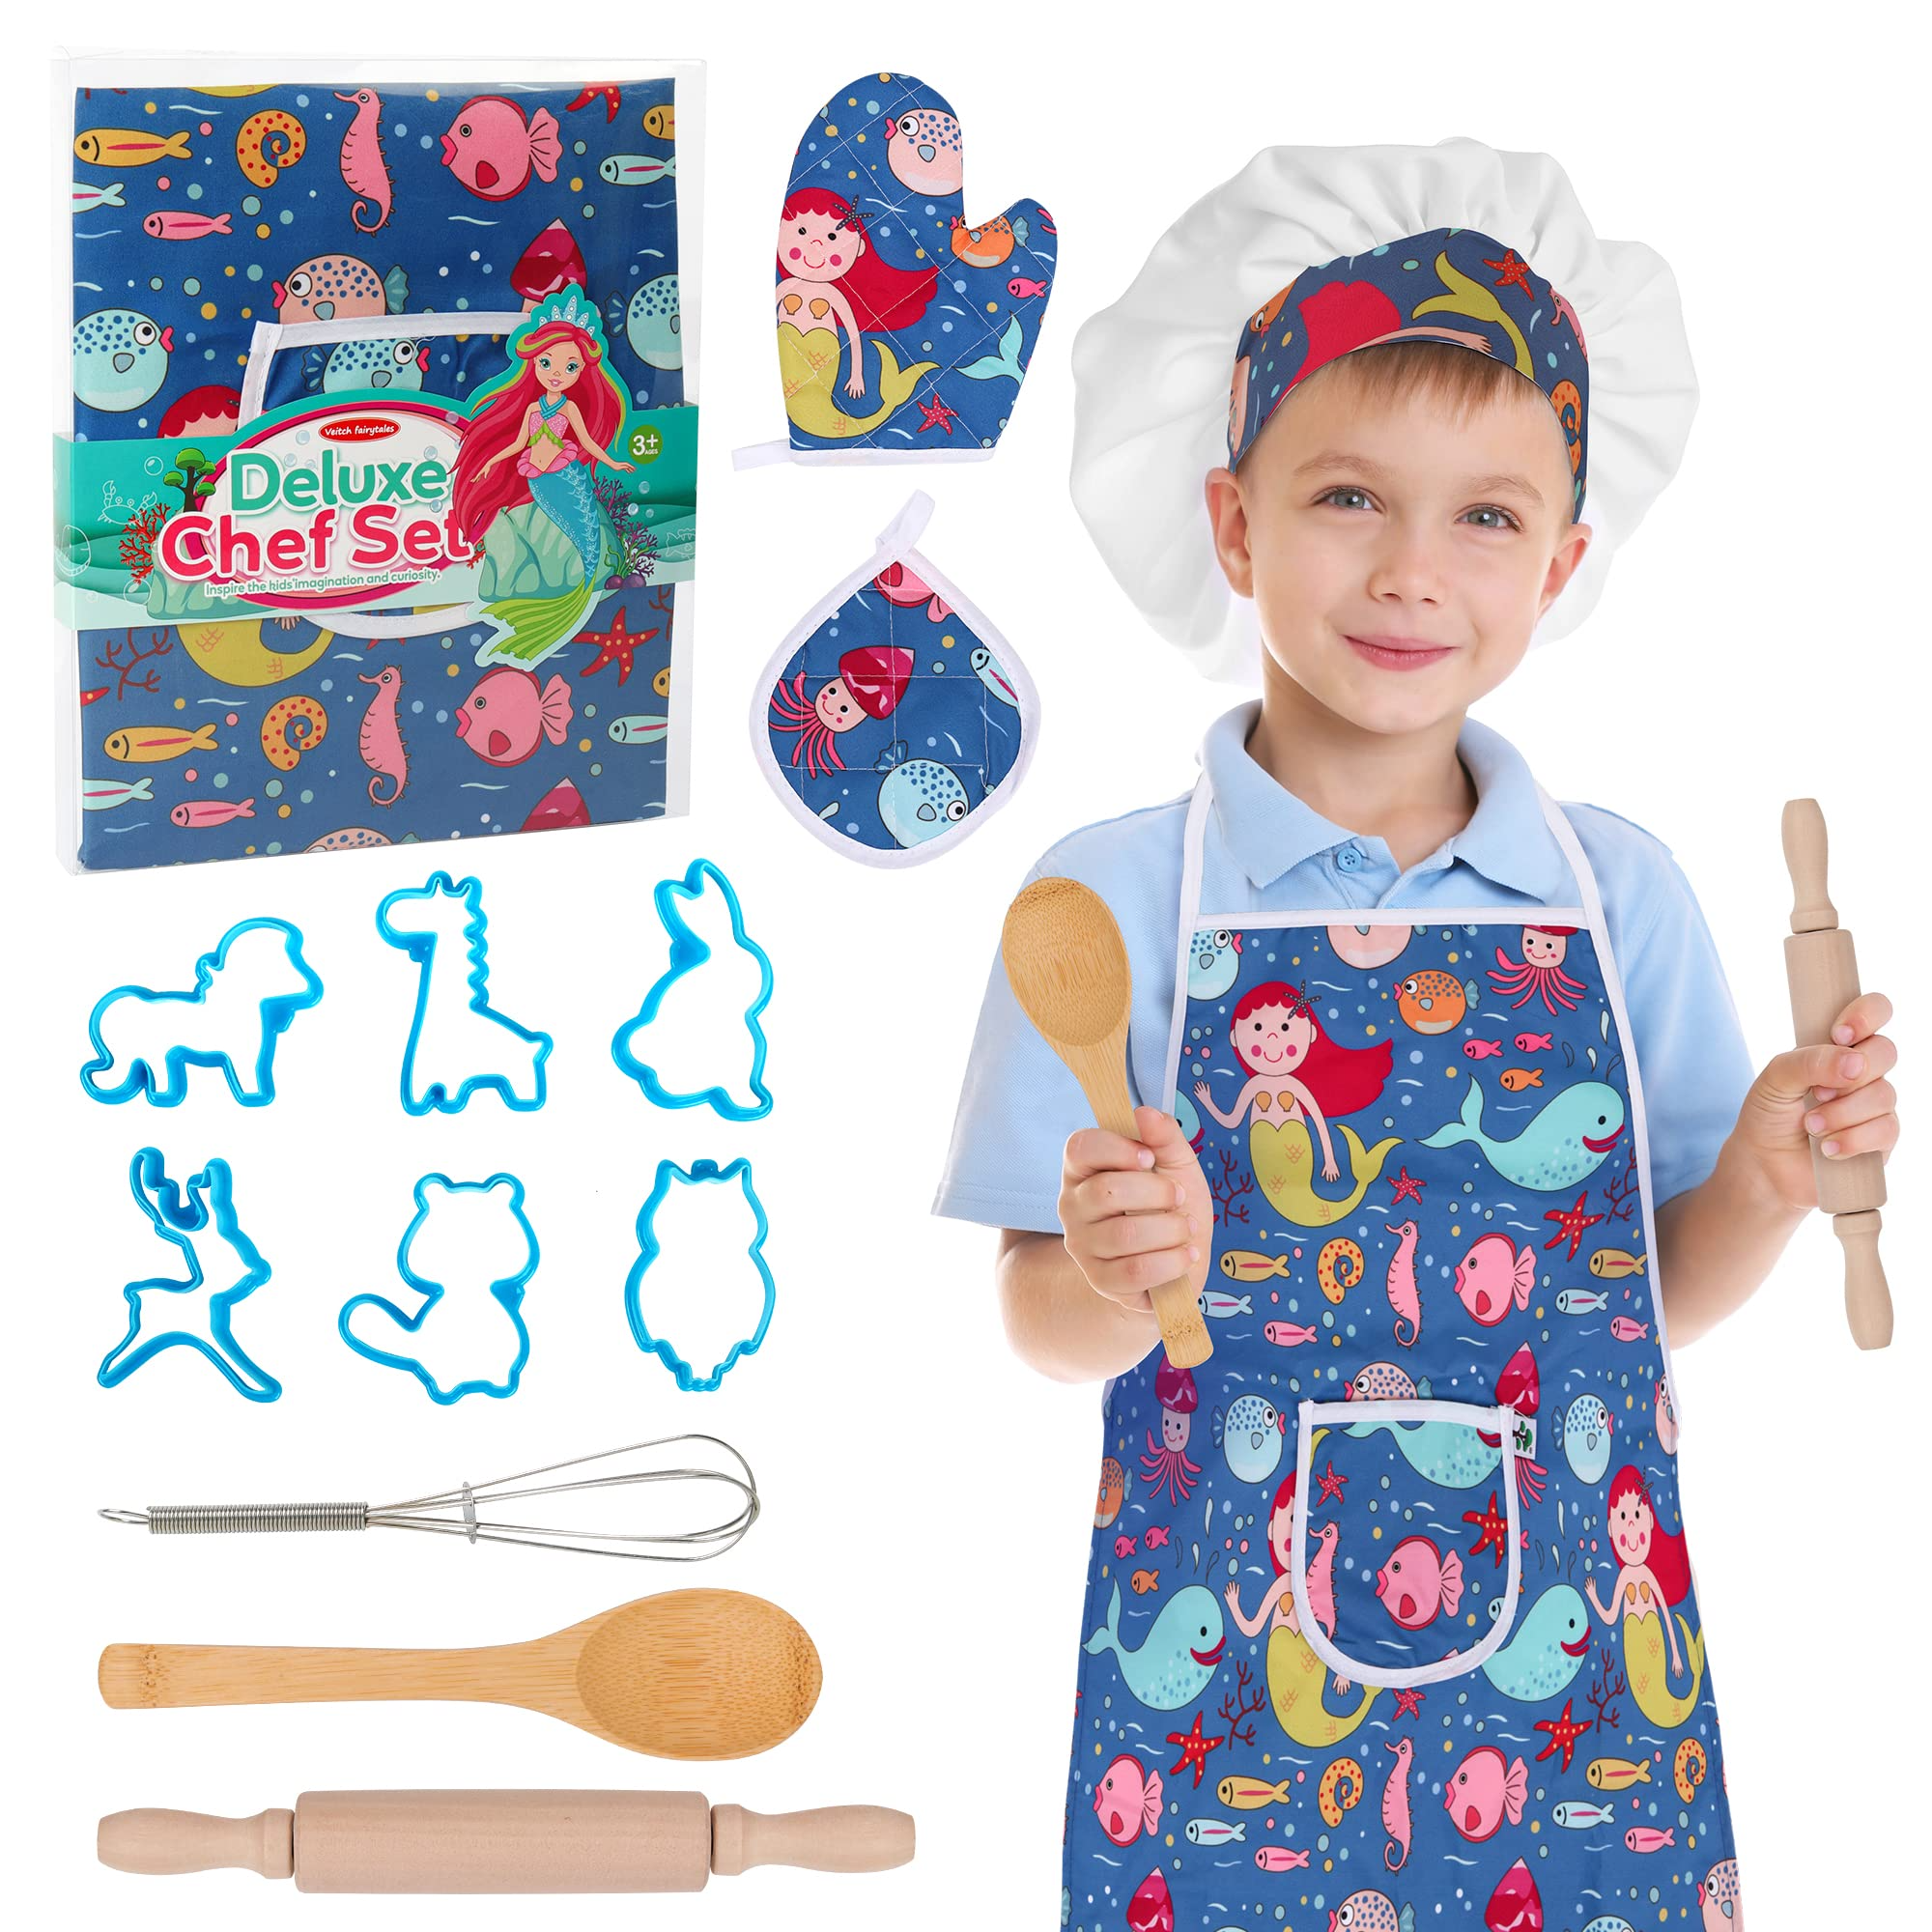 BOYS BLUE SPIDERMAN COOKING APRON AND CHEFS HAT GIFT SET SIZE AGE 3-8 YEARS 